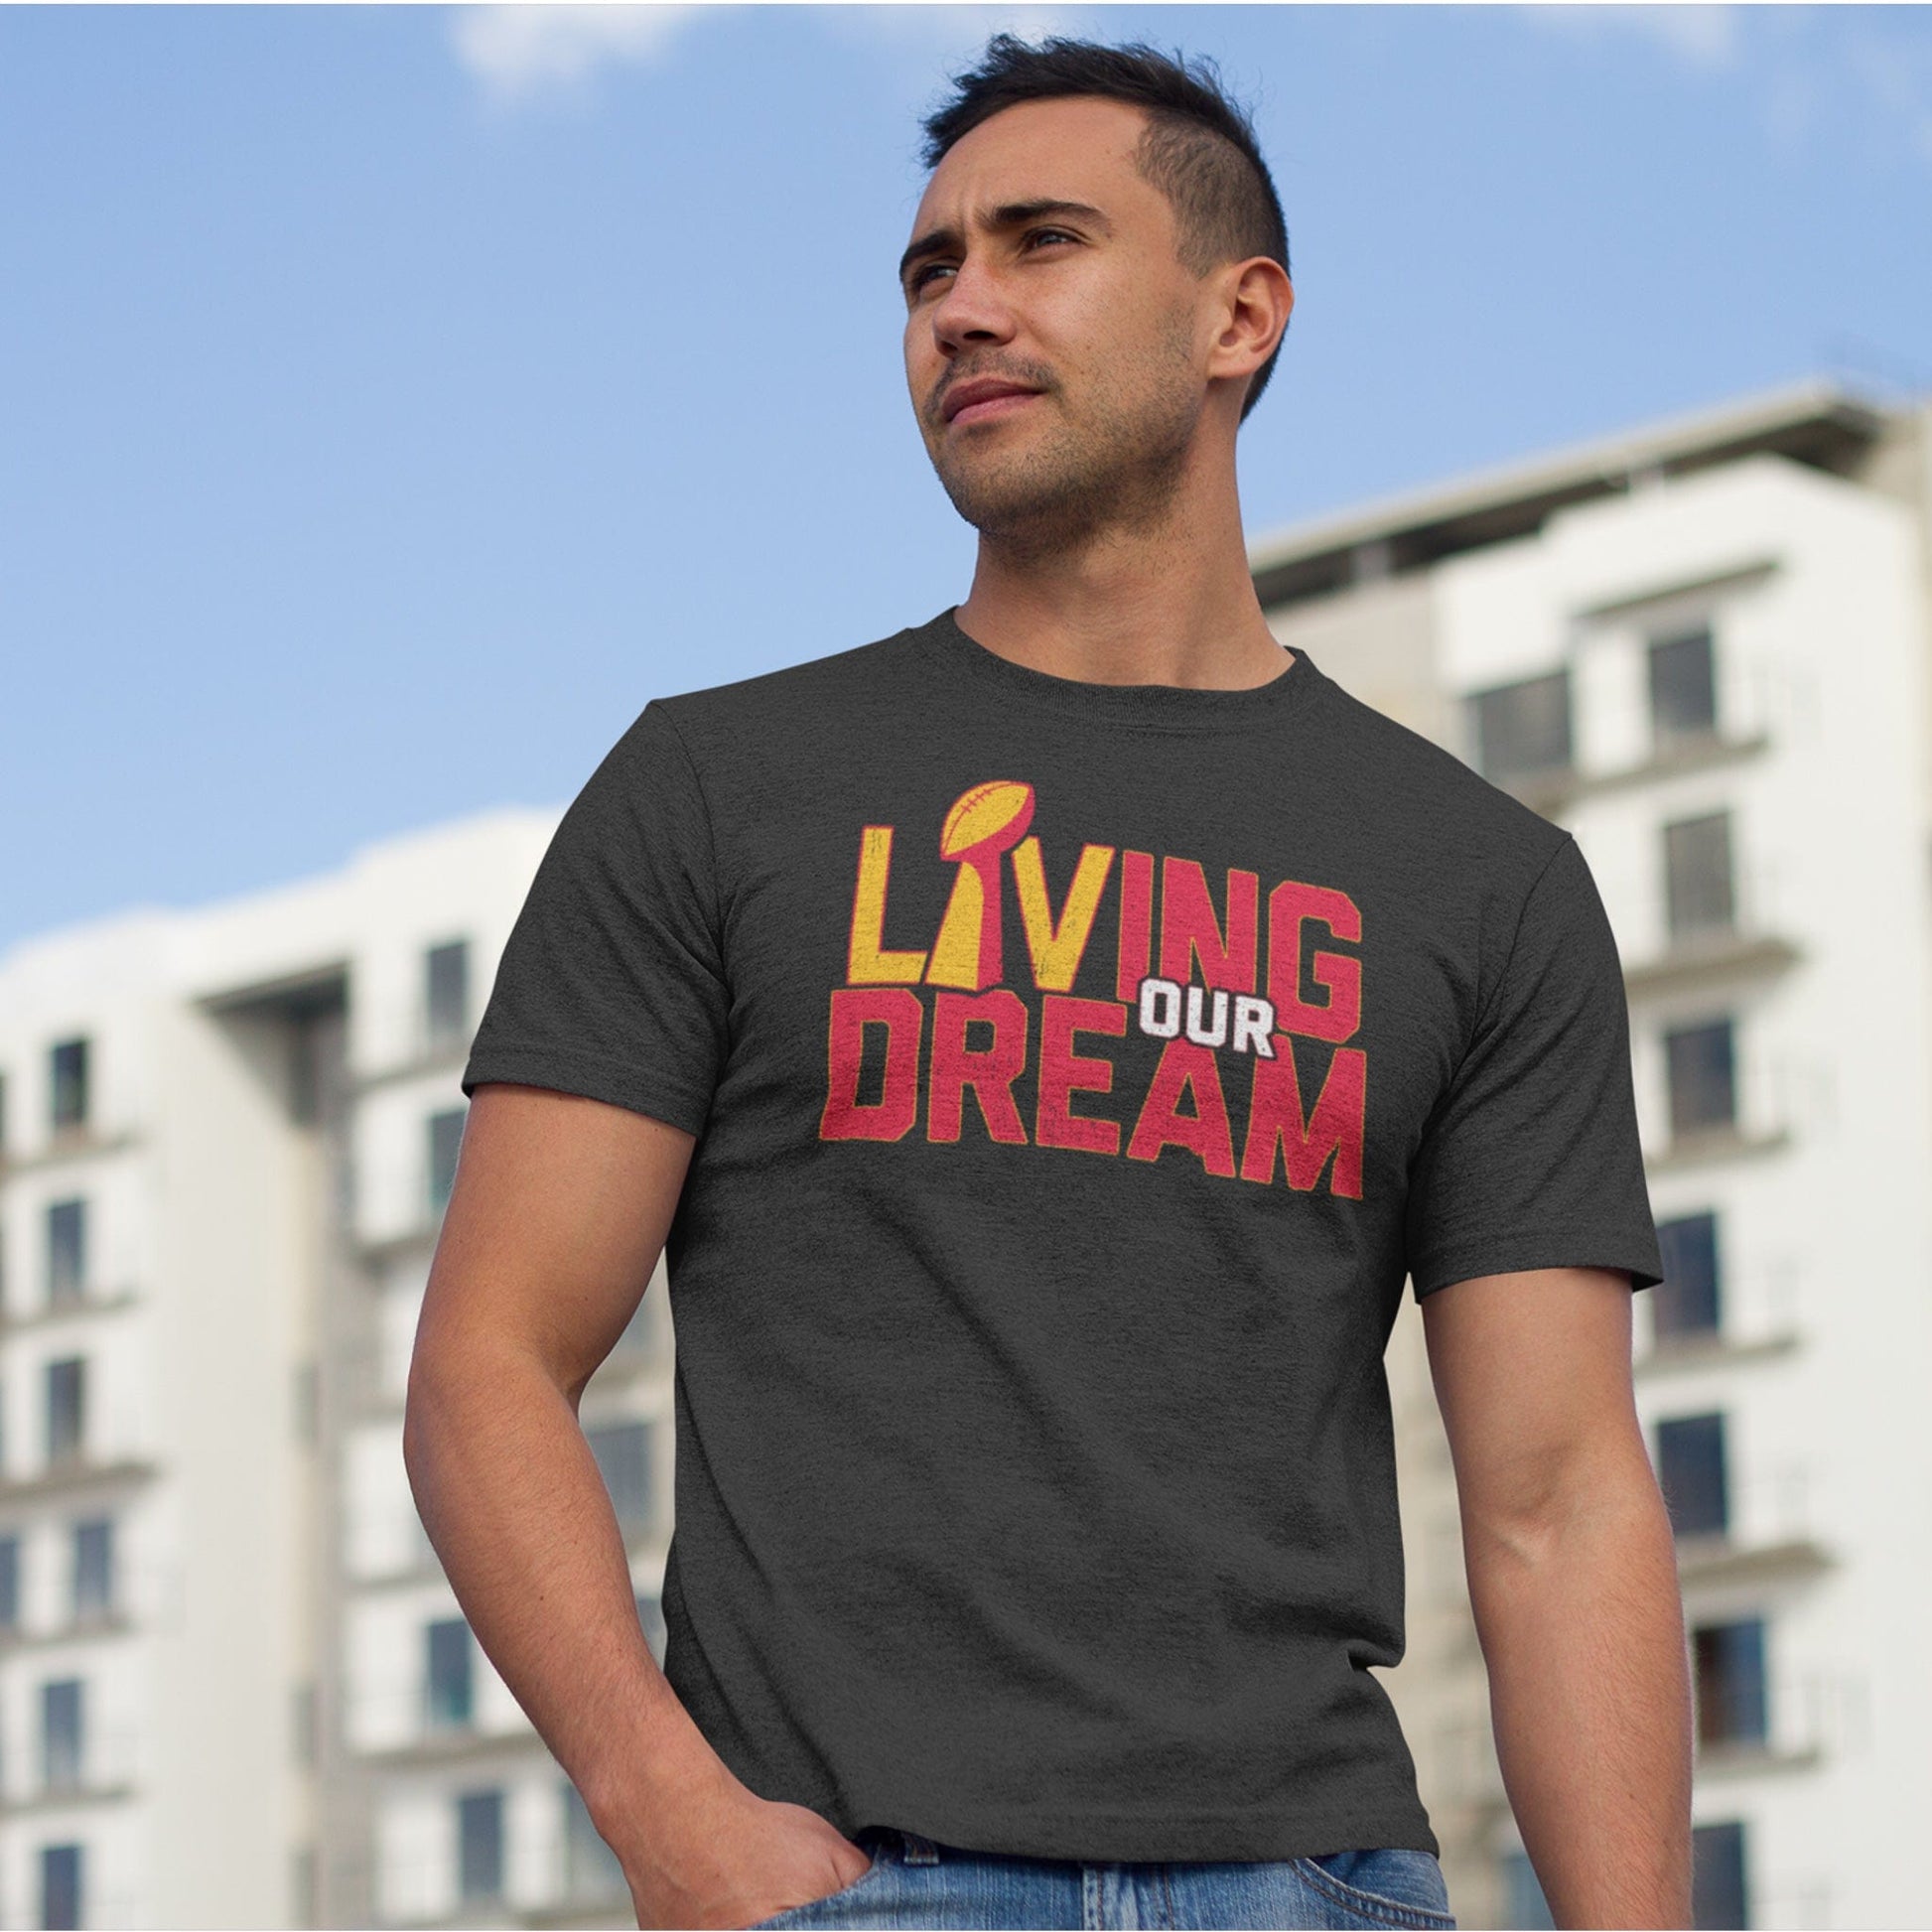 KC Swag Kansas City Chiefs red/yellow/white L(Lombardi trophy)IVING OUR DREAM on dark heather grey t-shirt worn by male model in front of apartment building